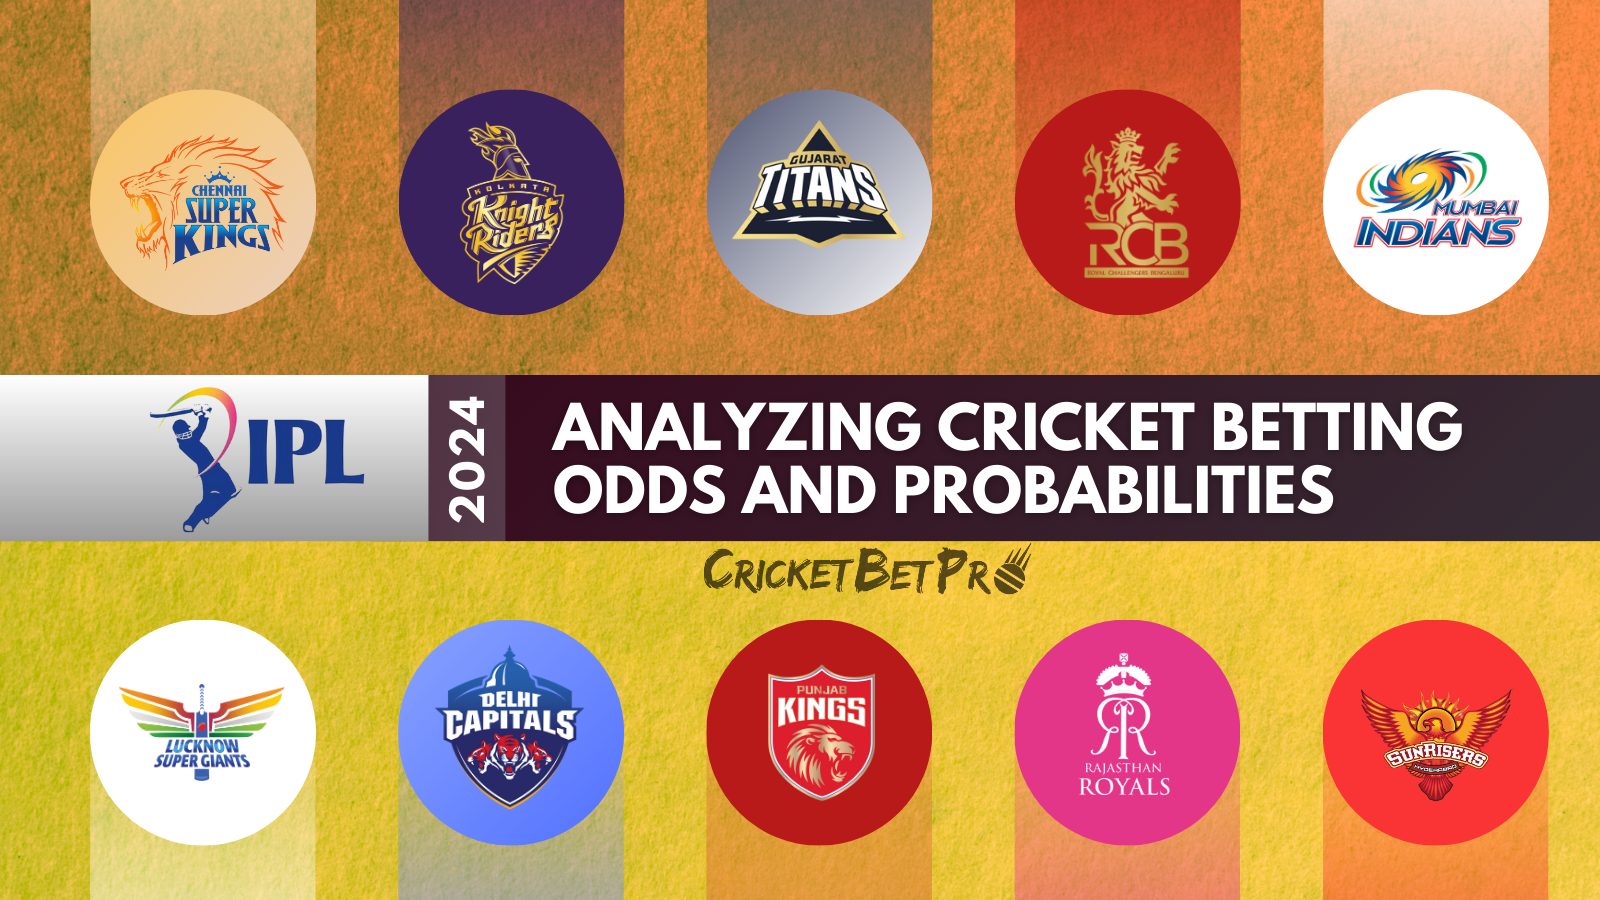 Analyzing Cricket Betting Odds And Probabilities